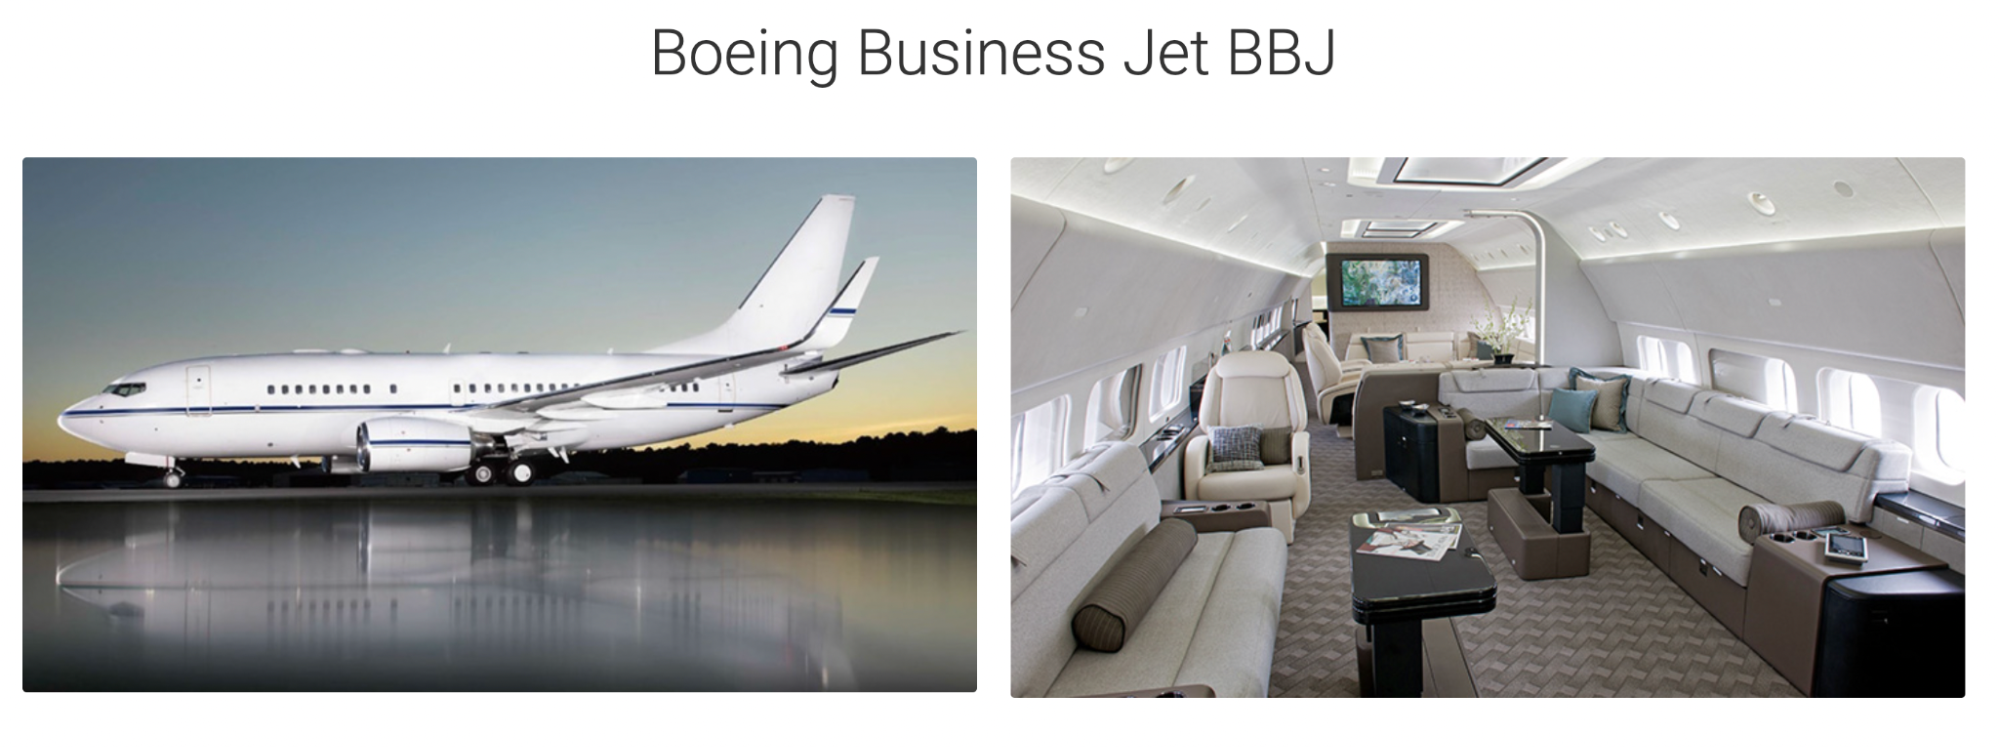 An image showing the exterior and interior of the VIP airliner Boeing Business Jet BBJ.